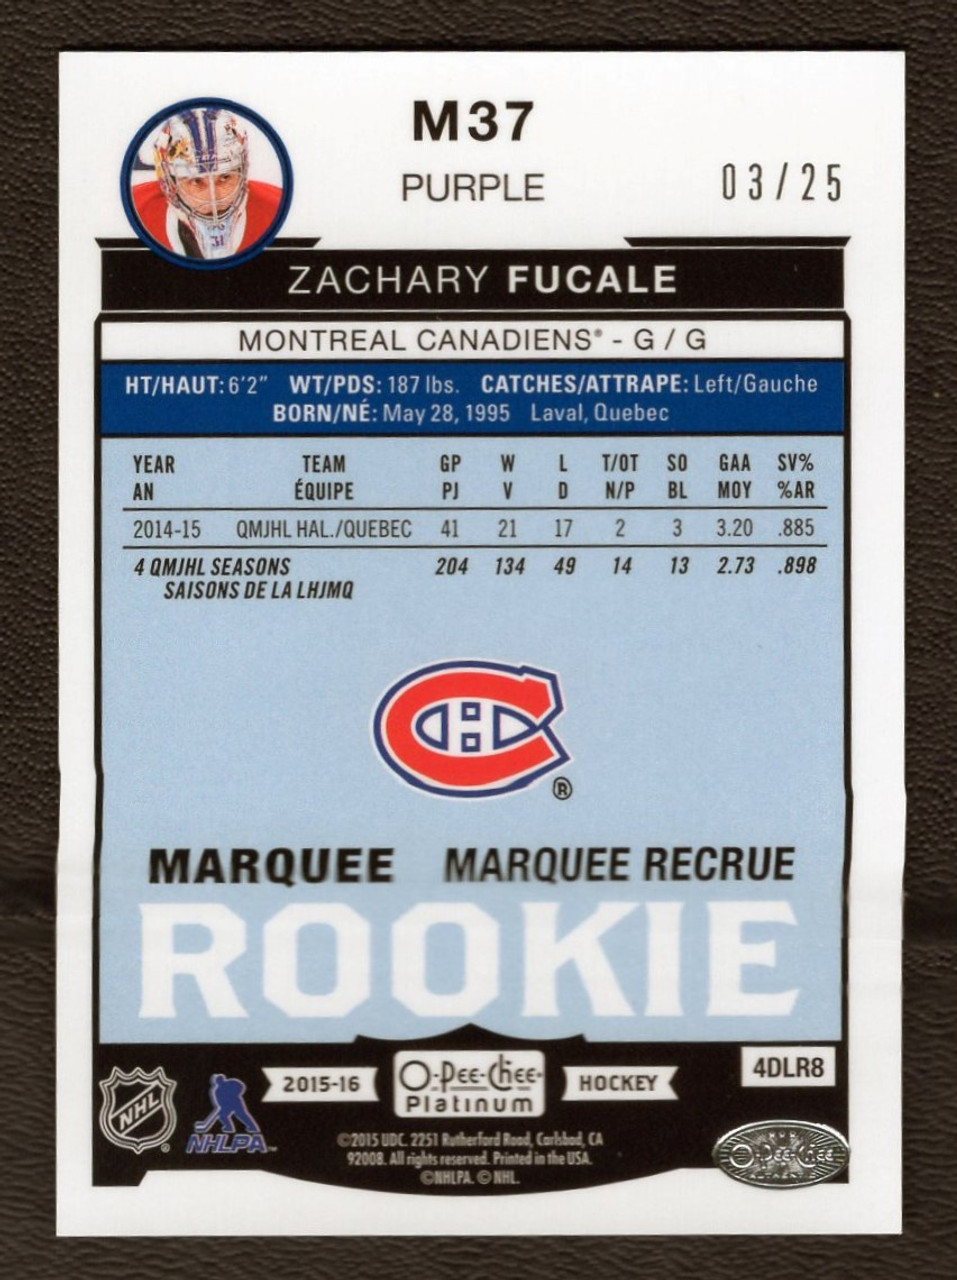 2015-16 Upper Deck OPC Platinum #M37 Zachary Fucale 03/25 Purple Marquee Rookie